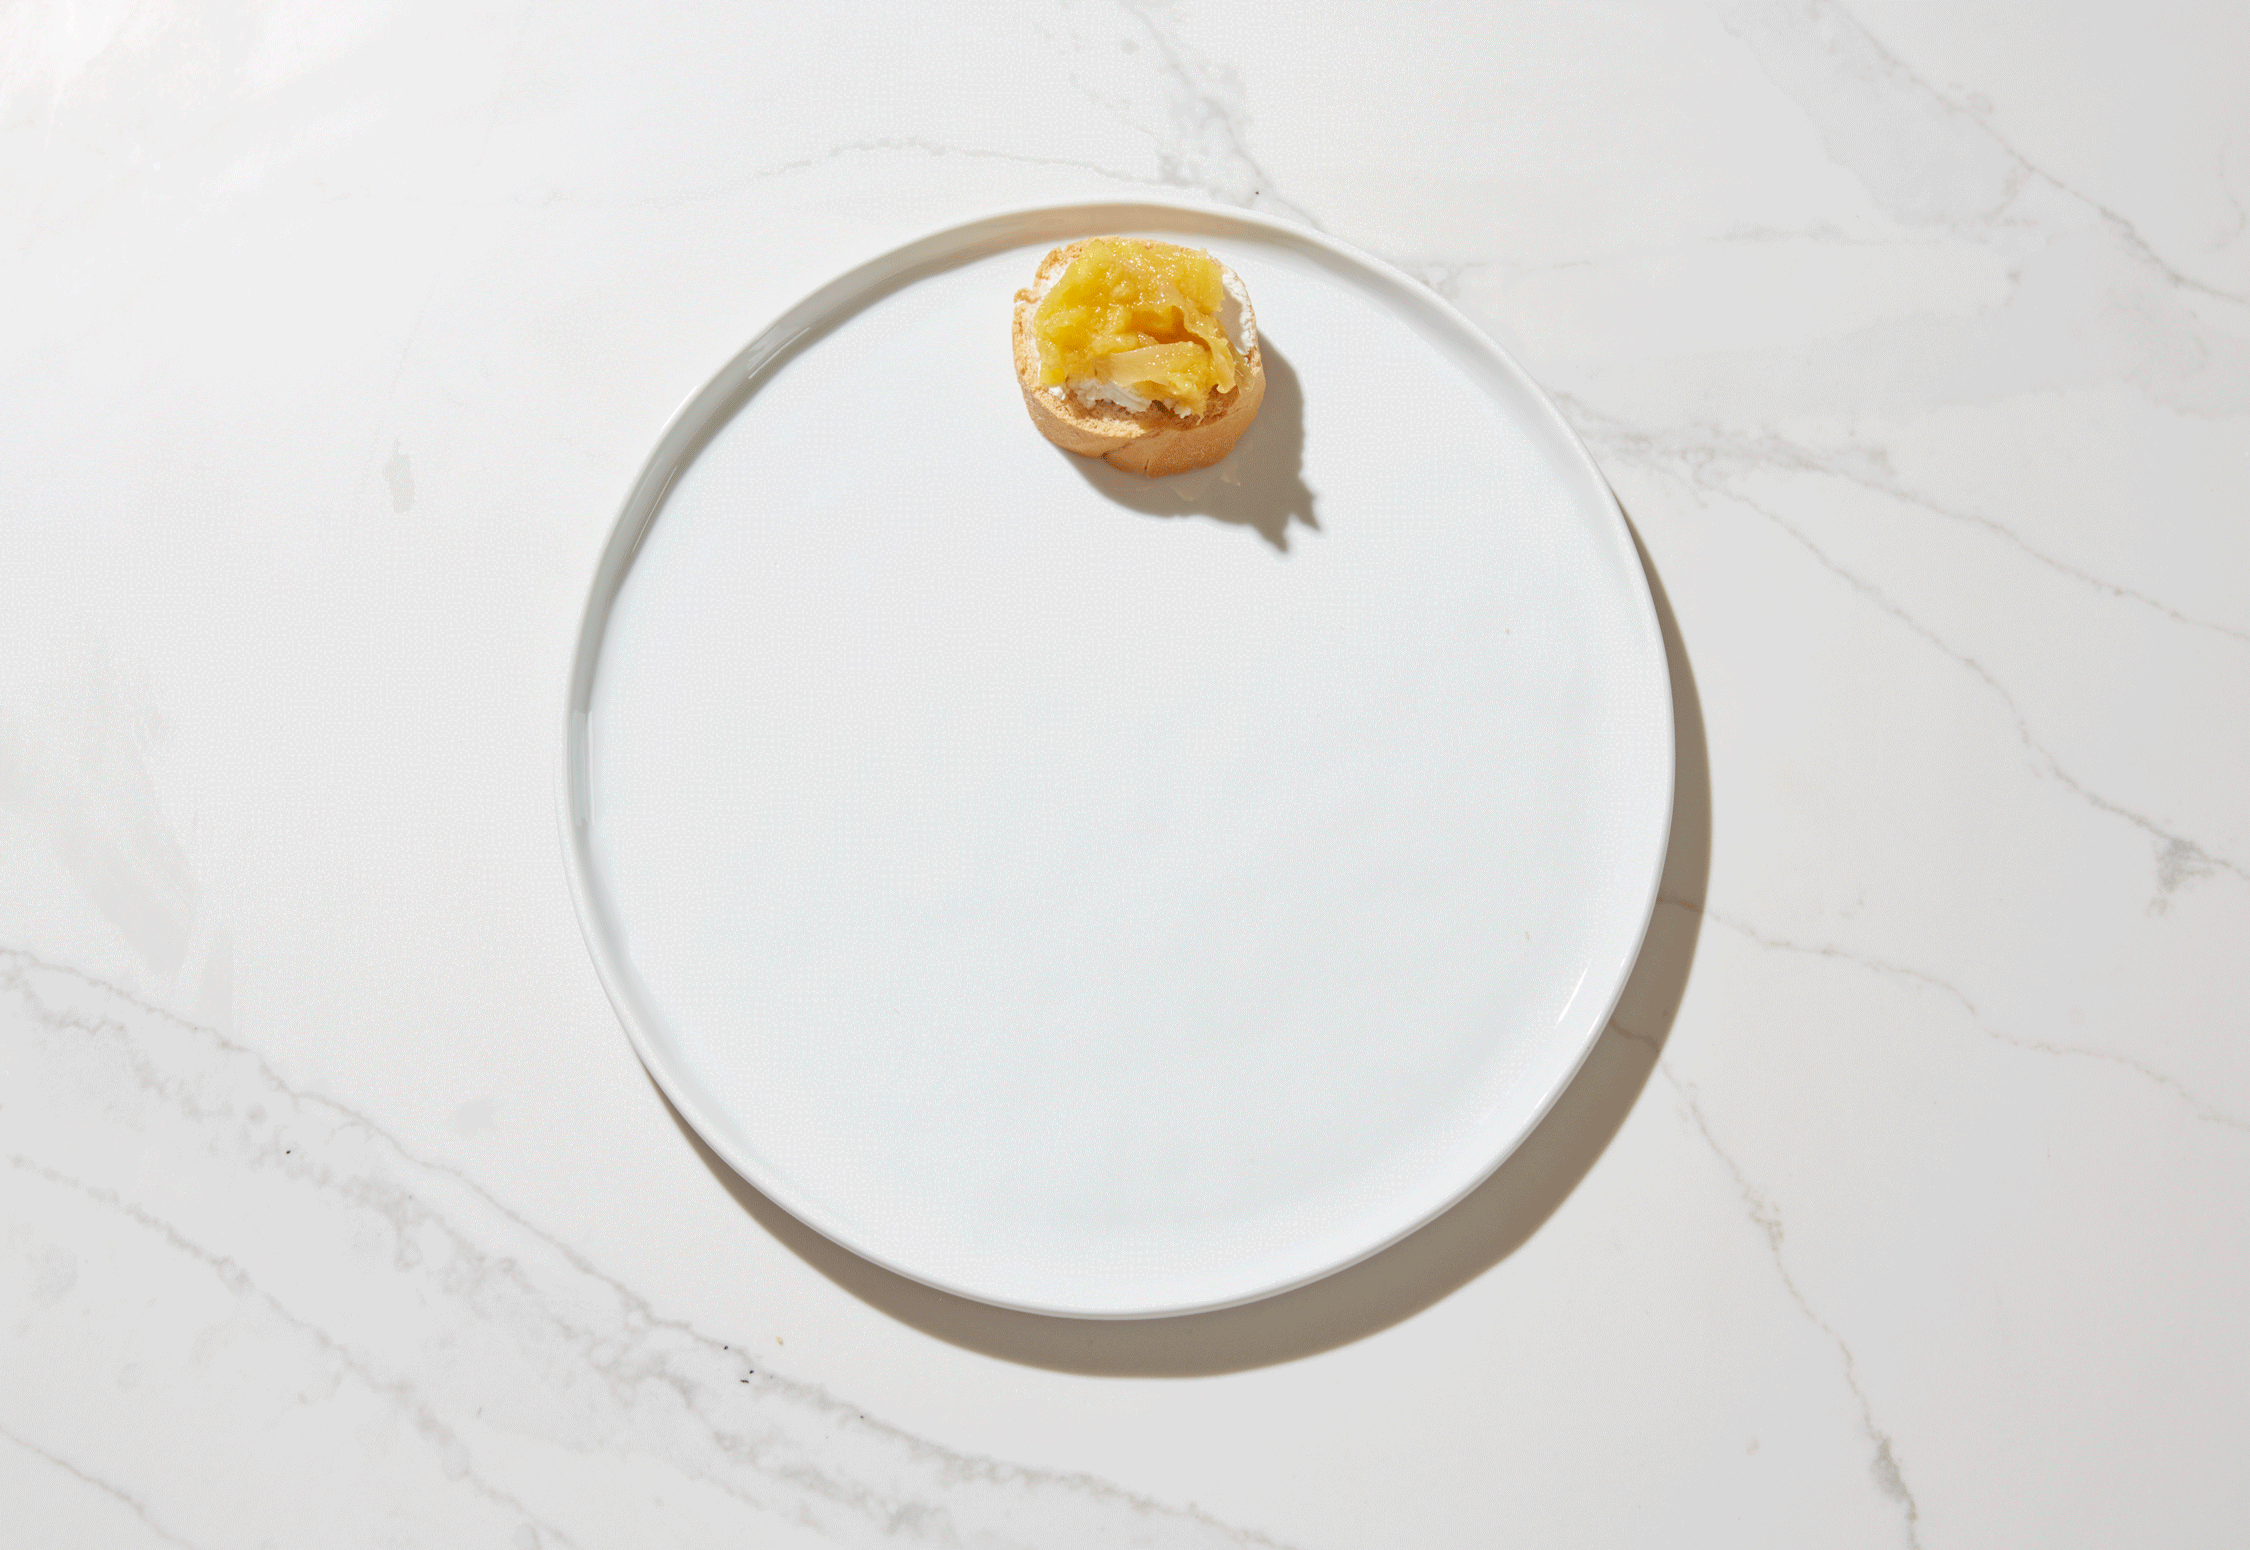 Squash appearing on plate gif.